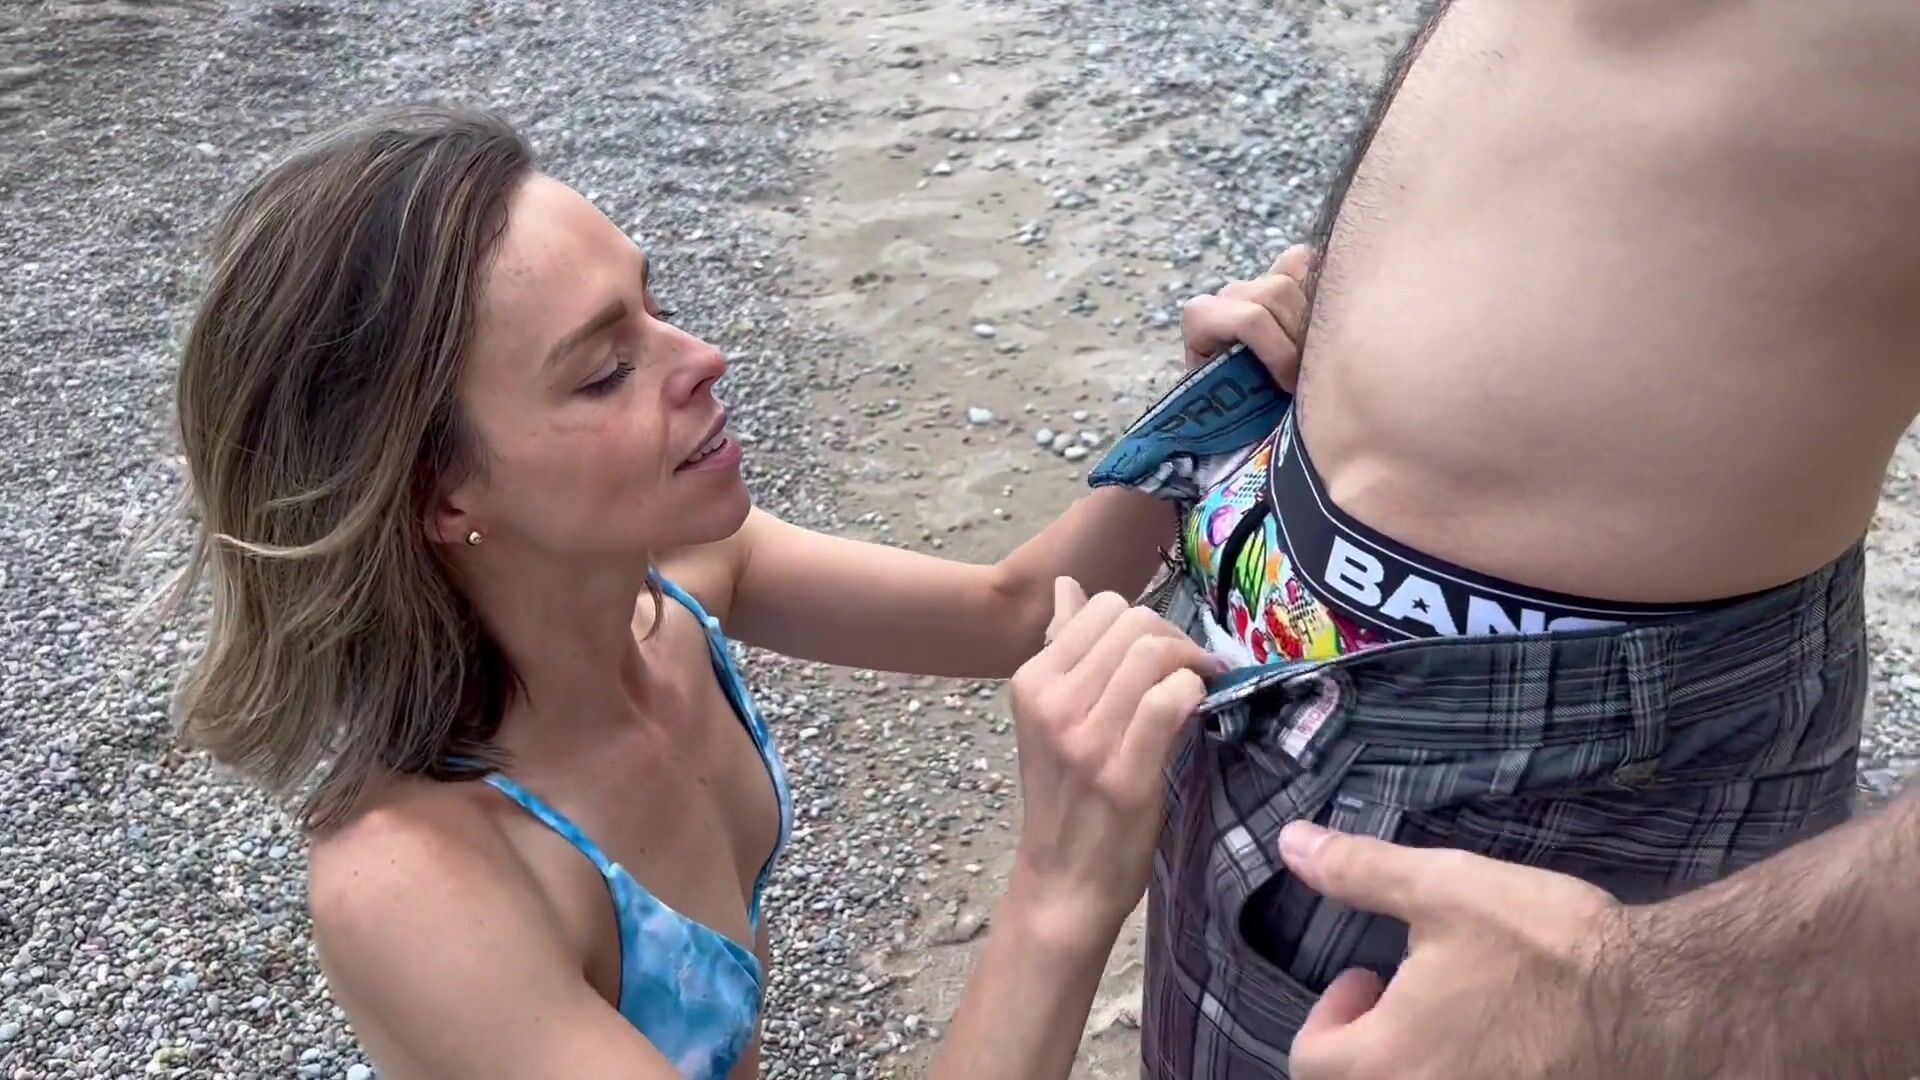 Wife fucks two cocks on public beach in a bikini / Unprotected creampie and facial / Amateur hotwife watch online pic